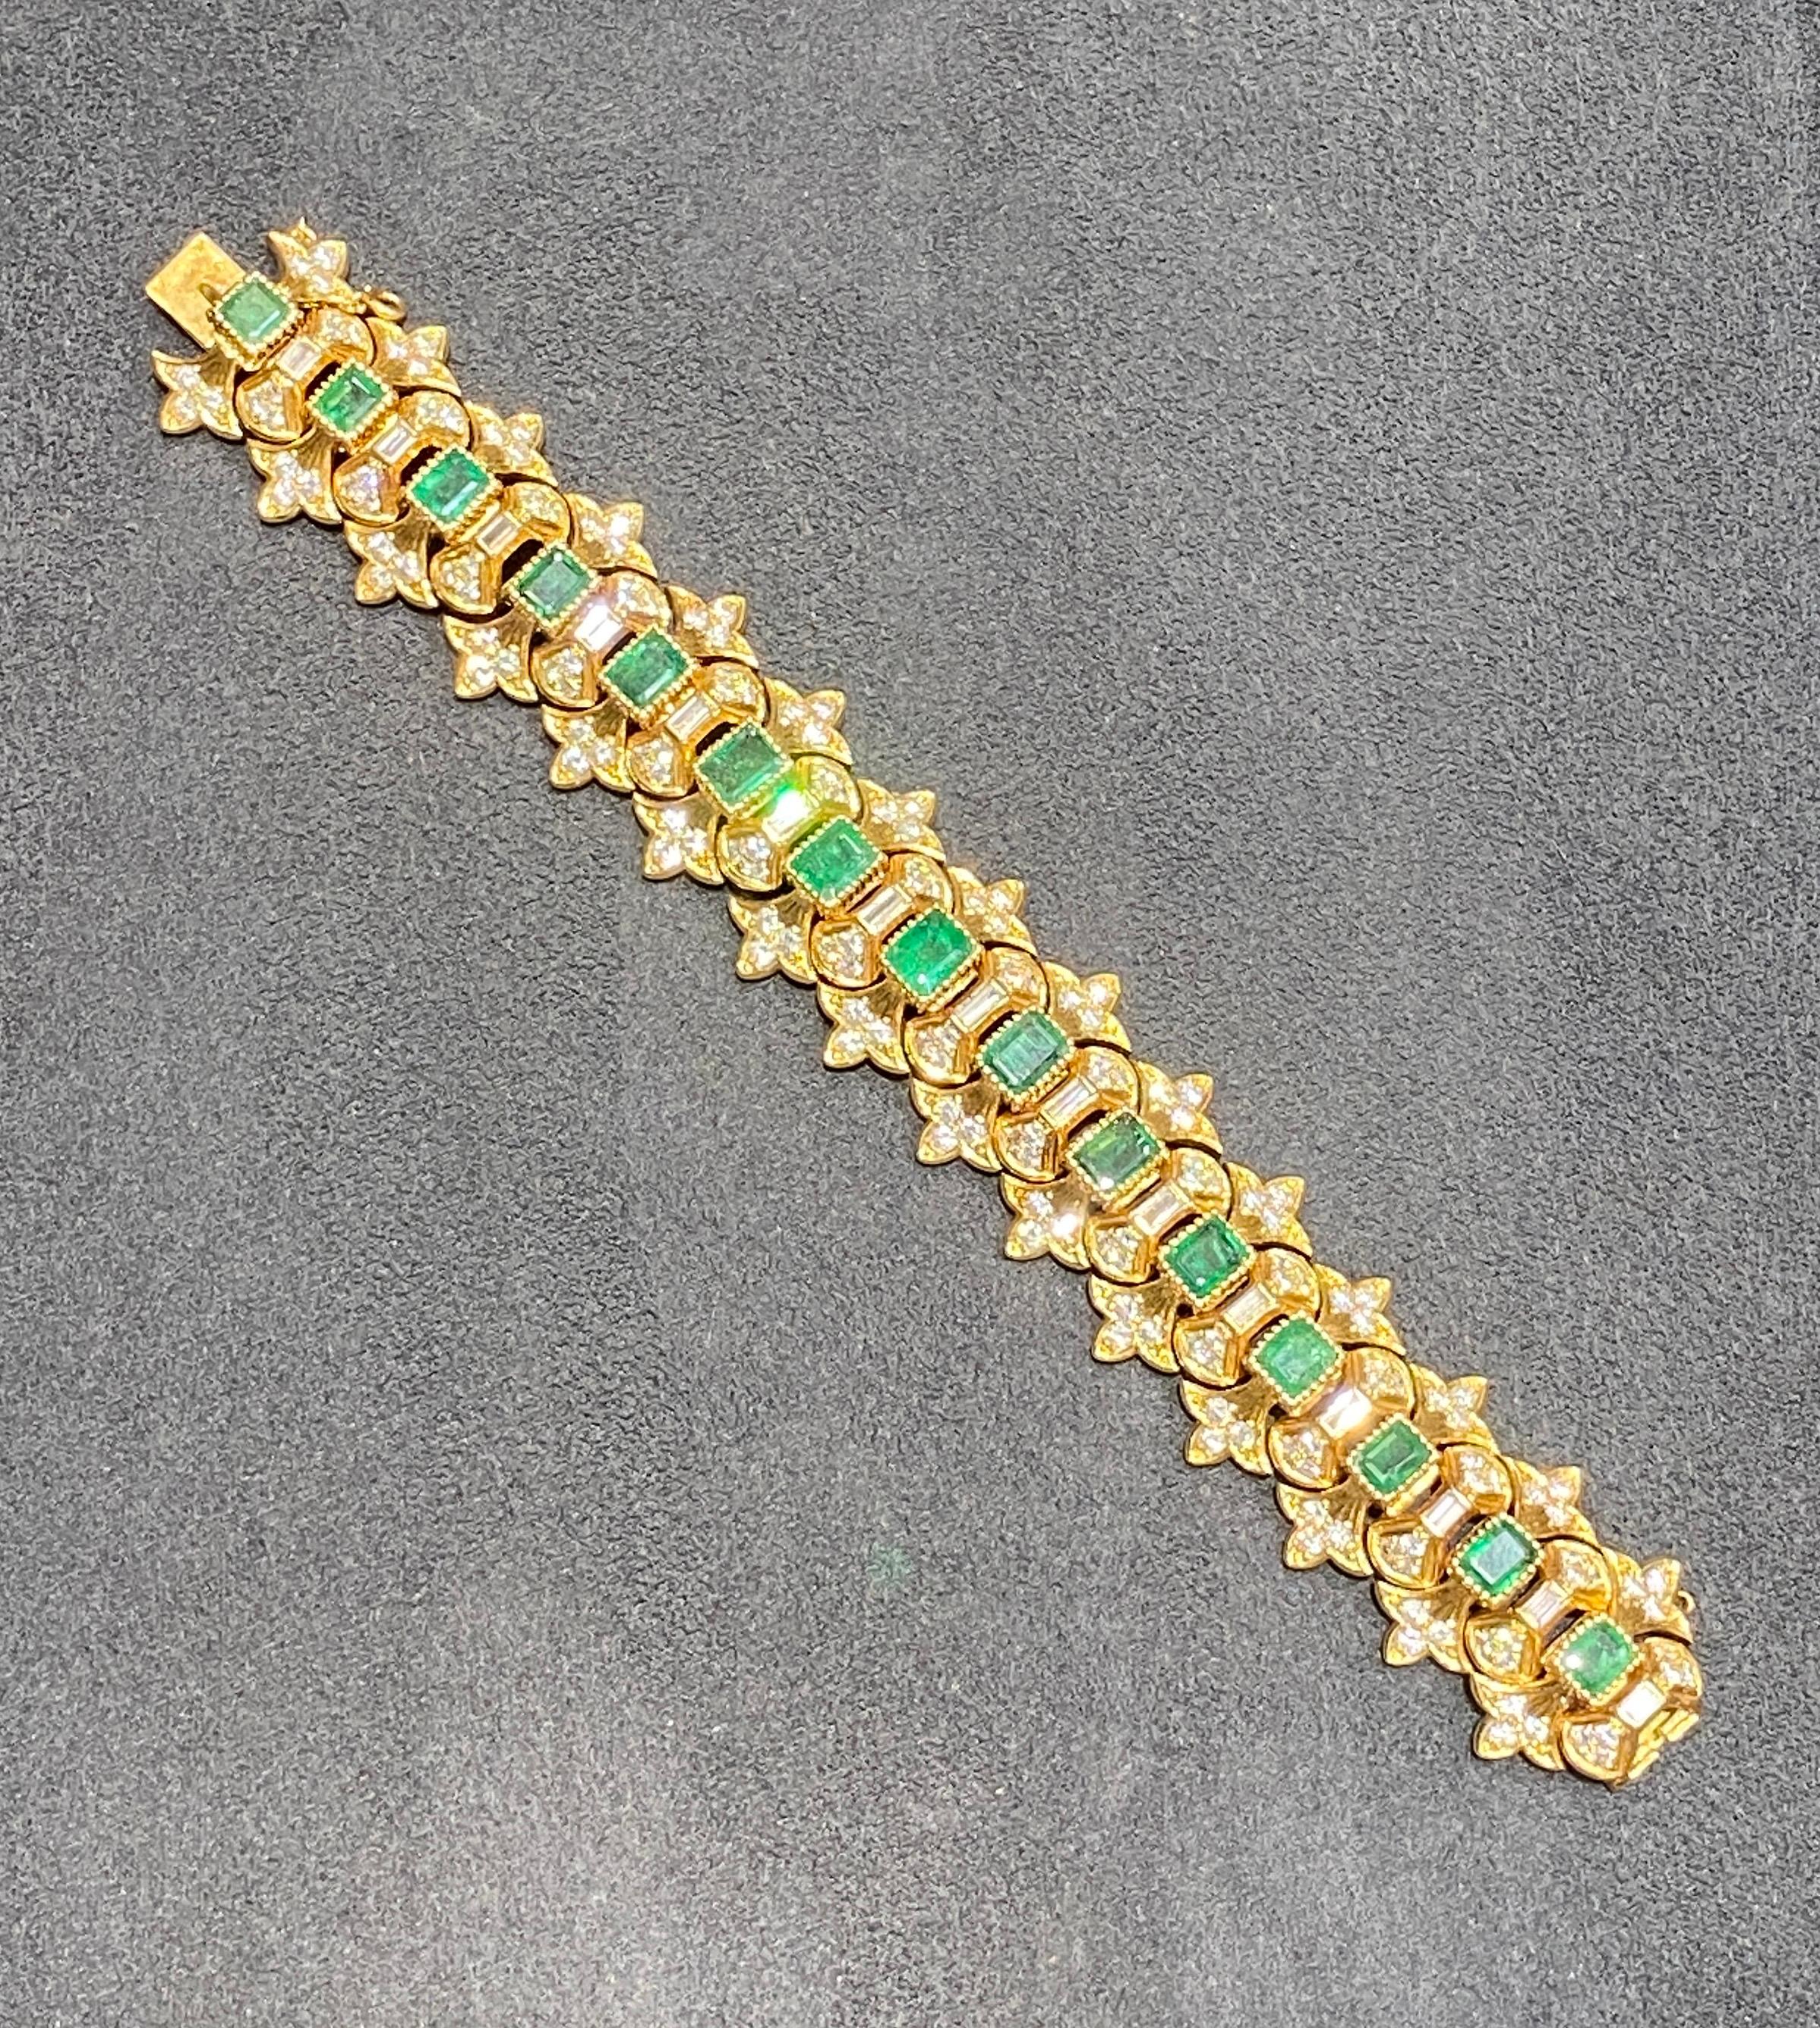 This striking Buccellati bracelet is made of 18 carat gold, diamonds and emeralds. The design is centred around 15 emerald cut Colombian emeralds which total approximately 16 carats. The emeralds are adorned with approximately 12 carats of round cut